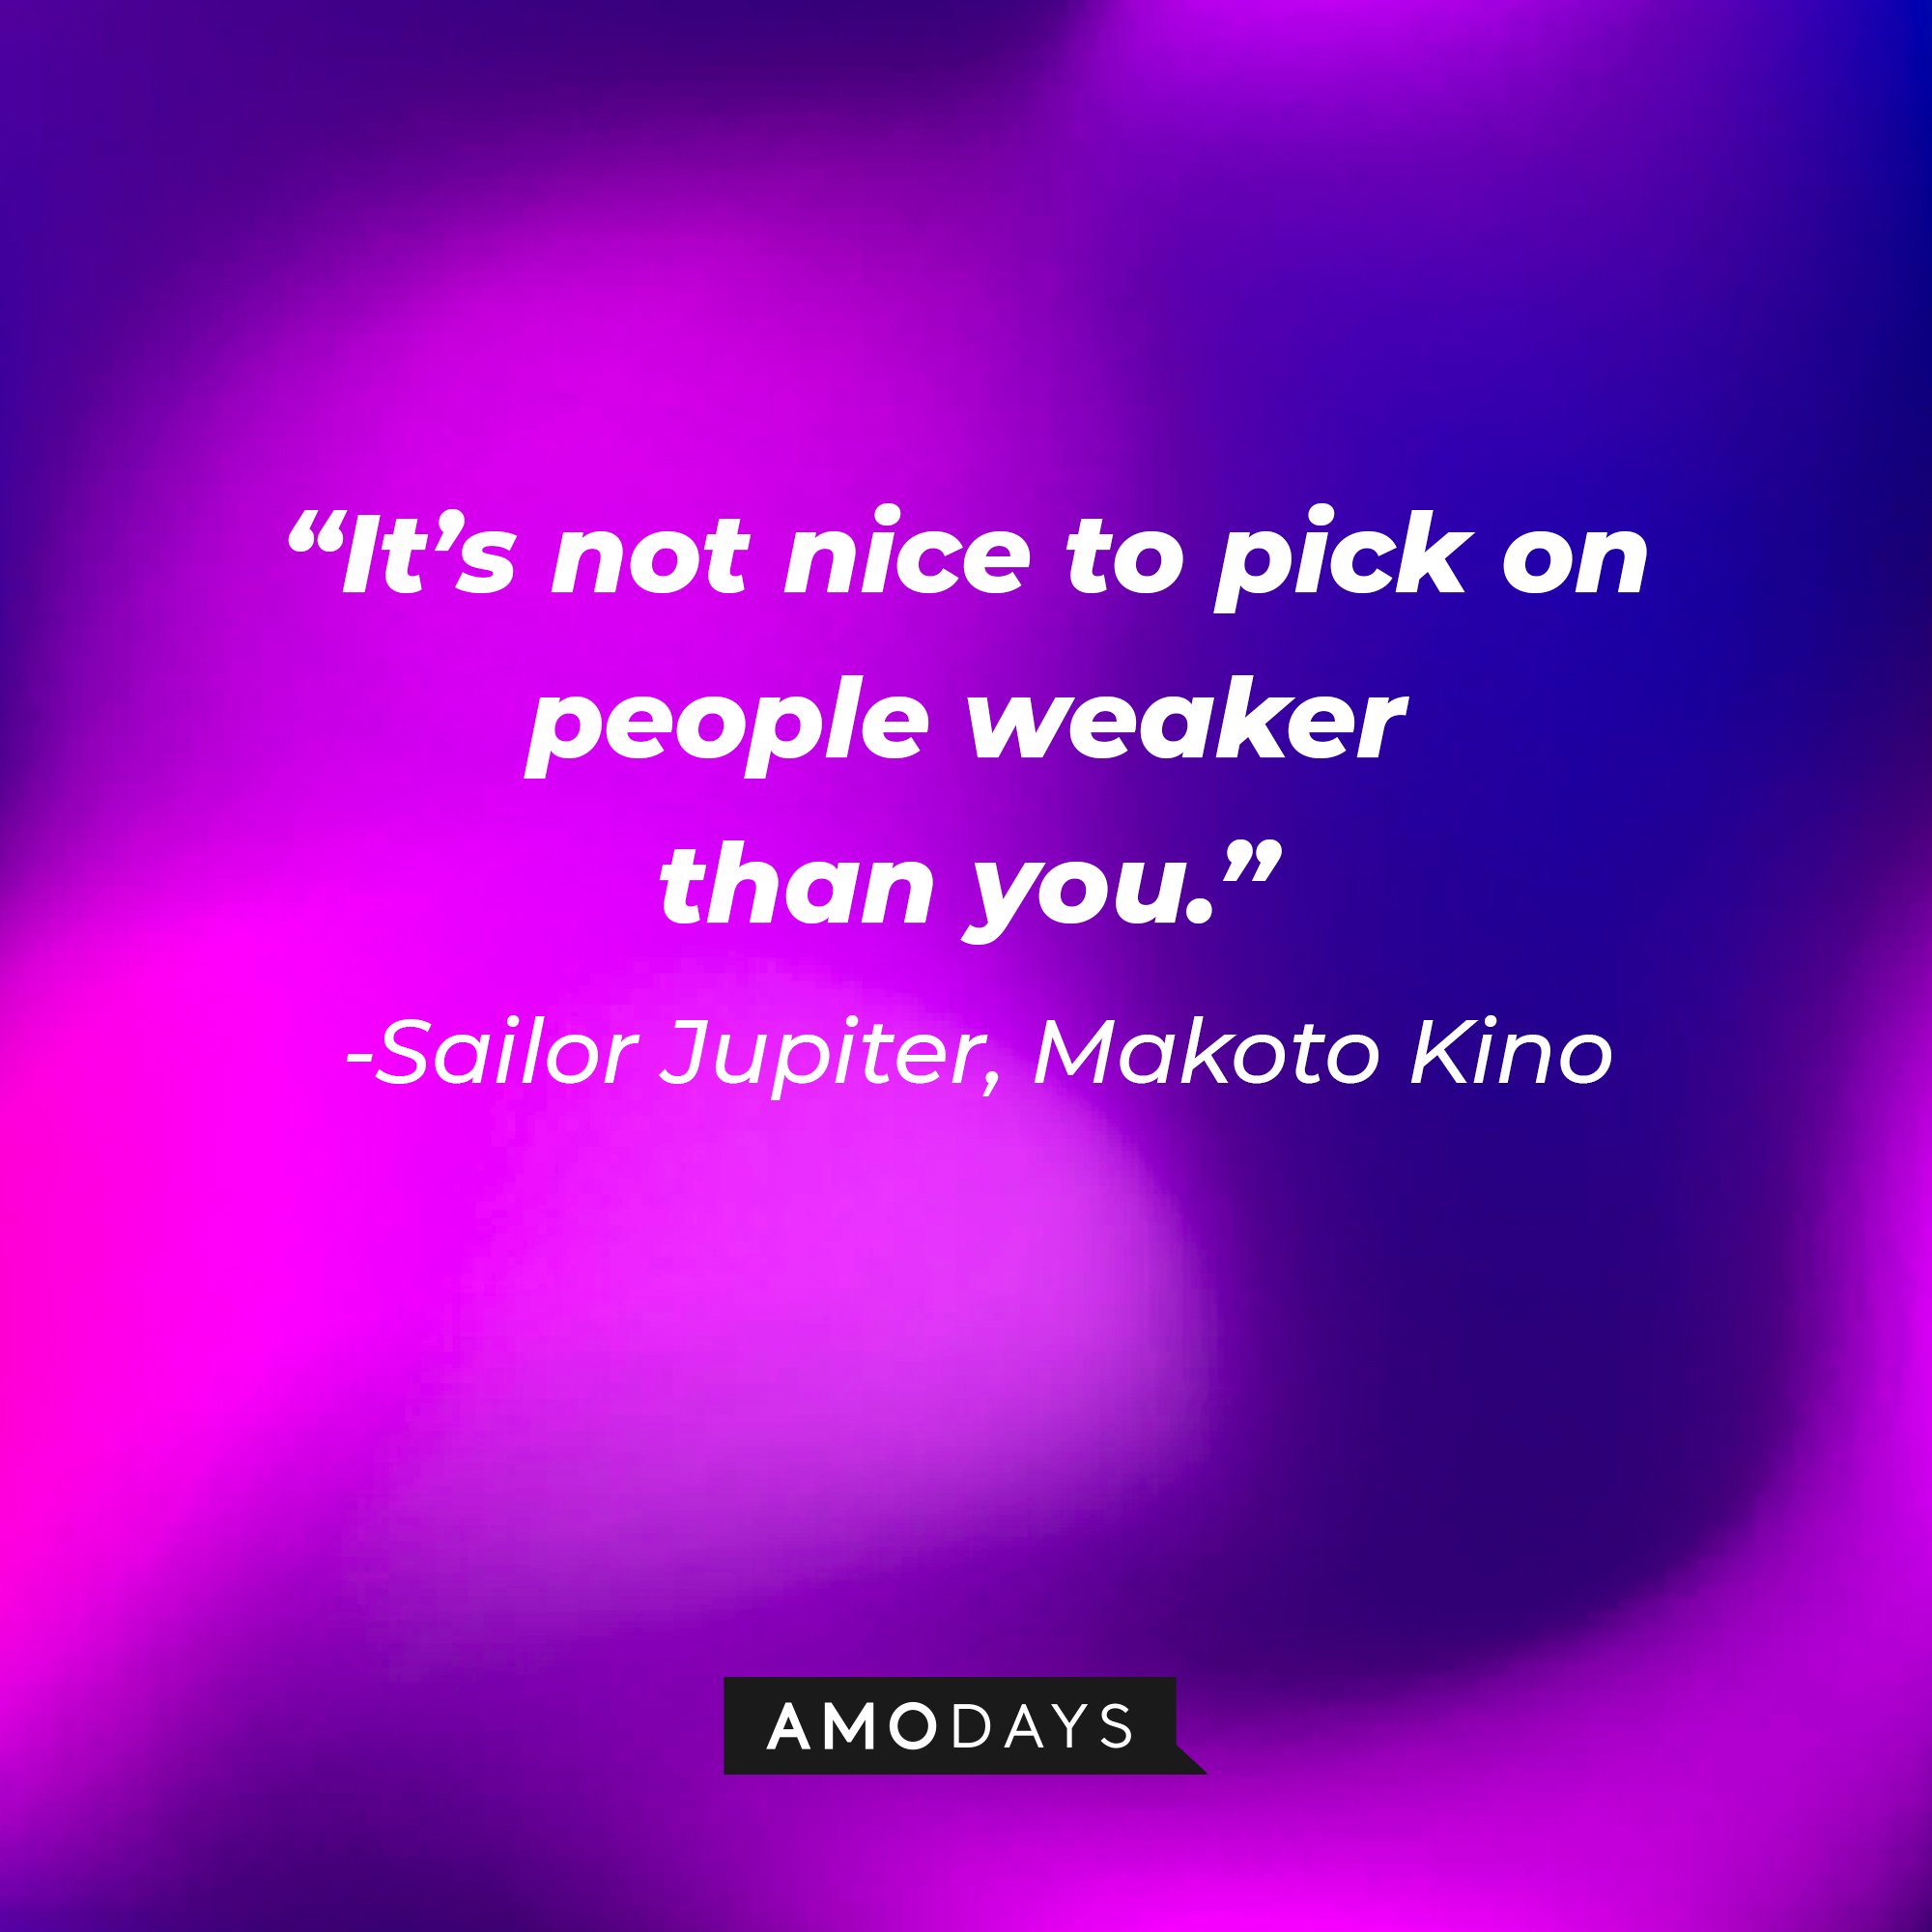  Sailor Jupiter/Makoto Kino’s quote: “It's not nice to pick on people weaker than you." | Image: AmoDays